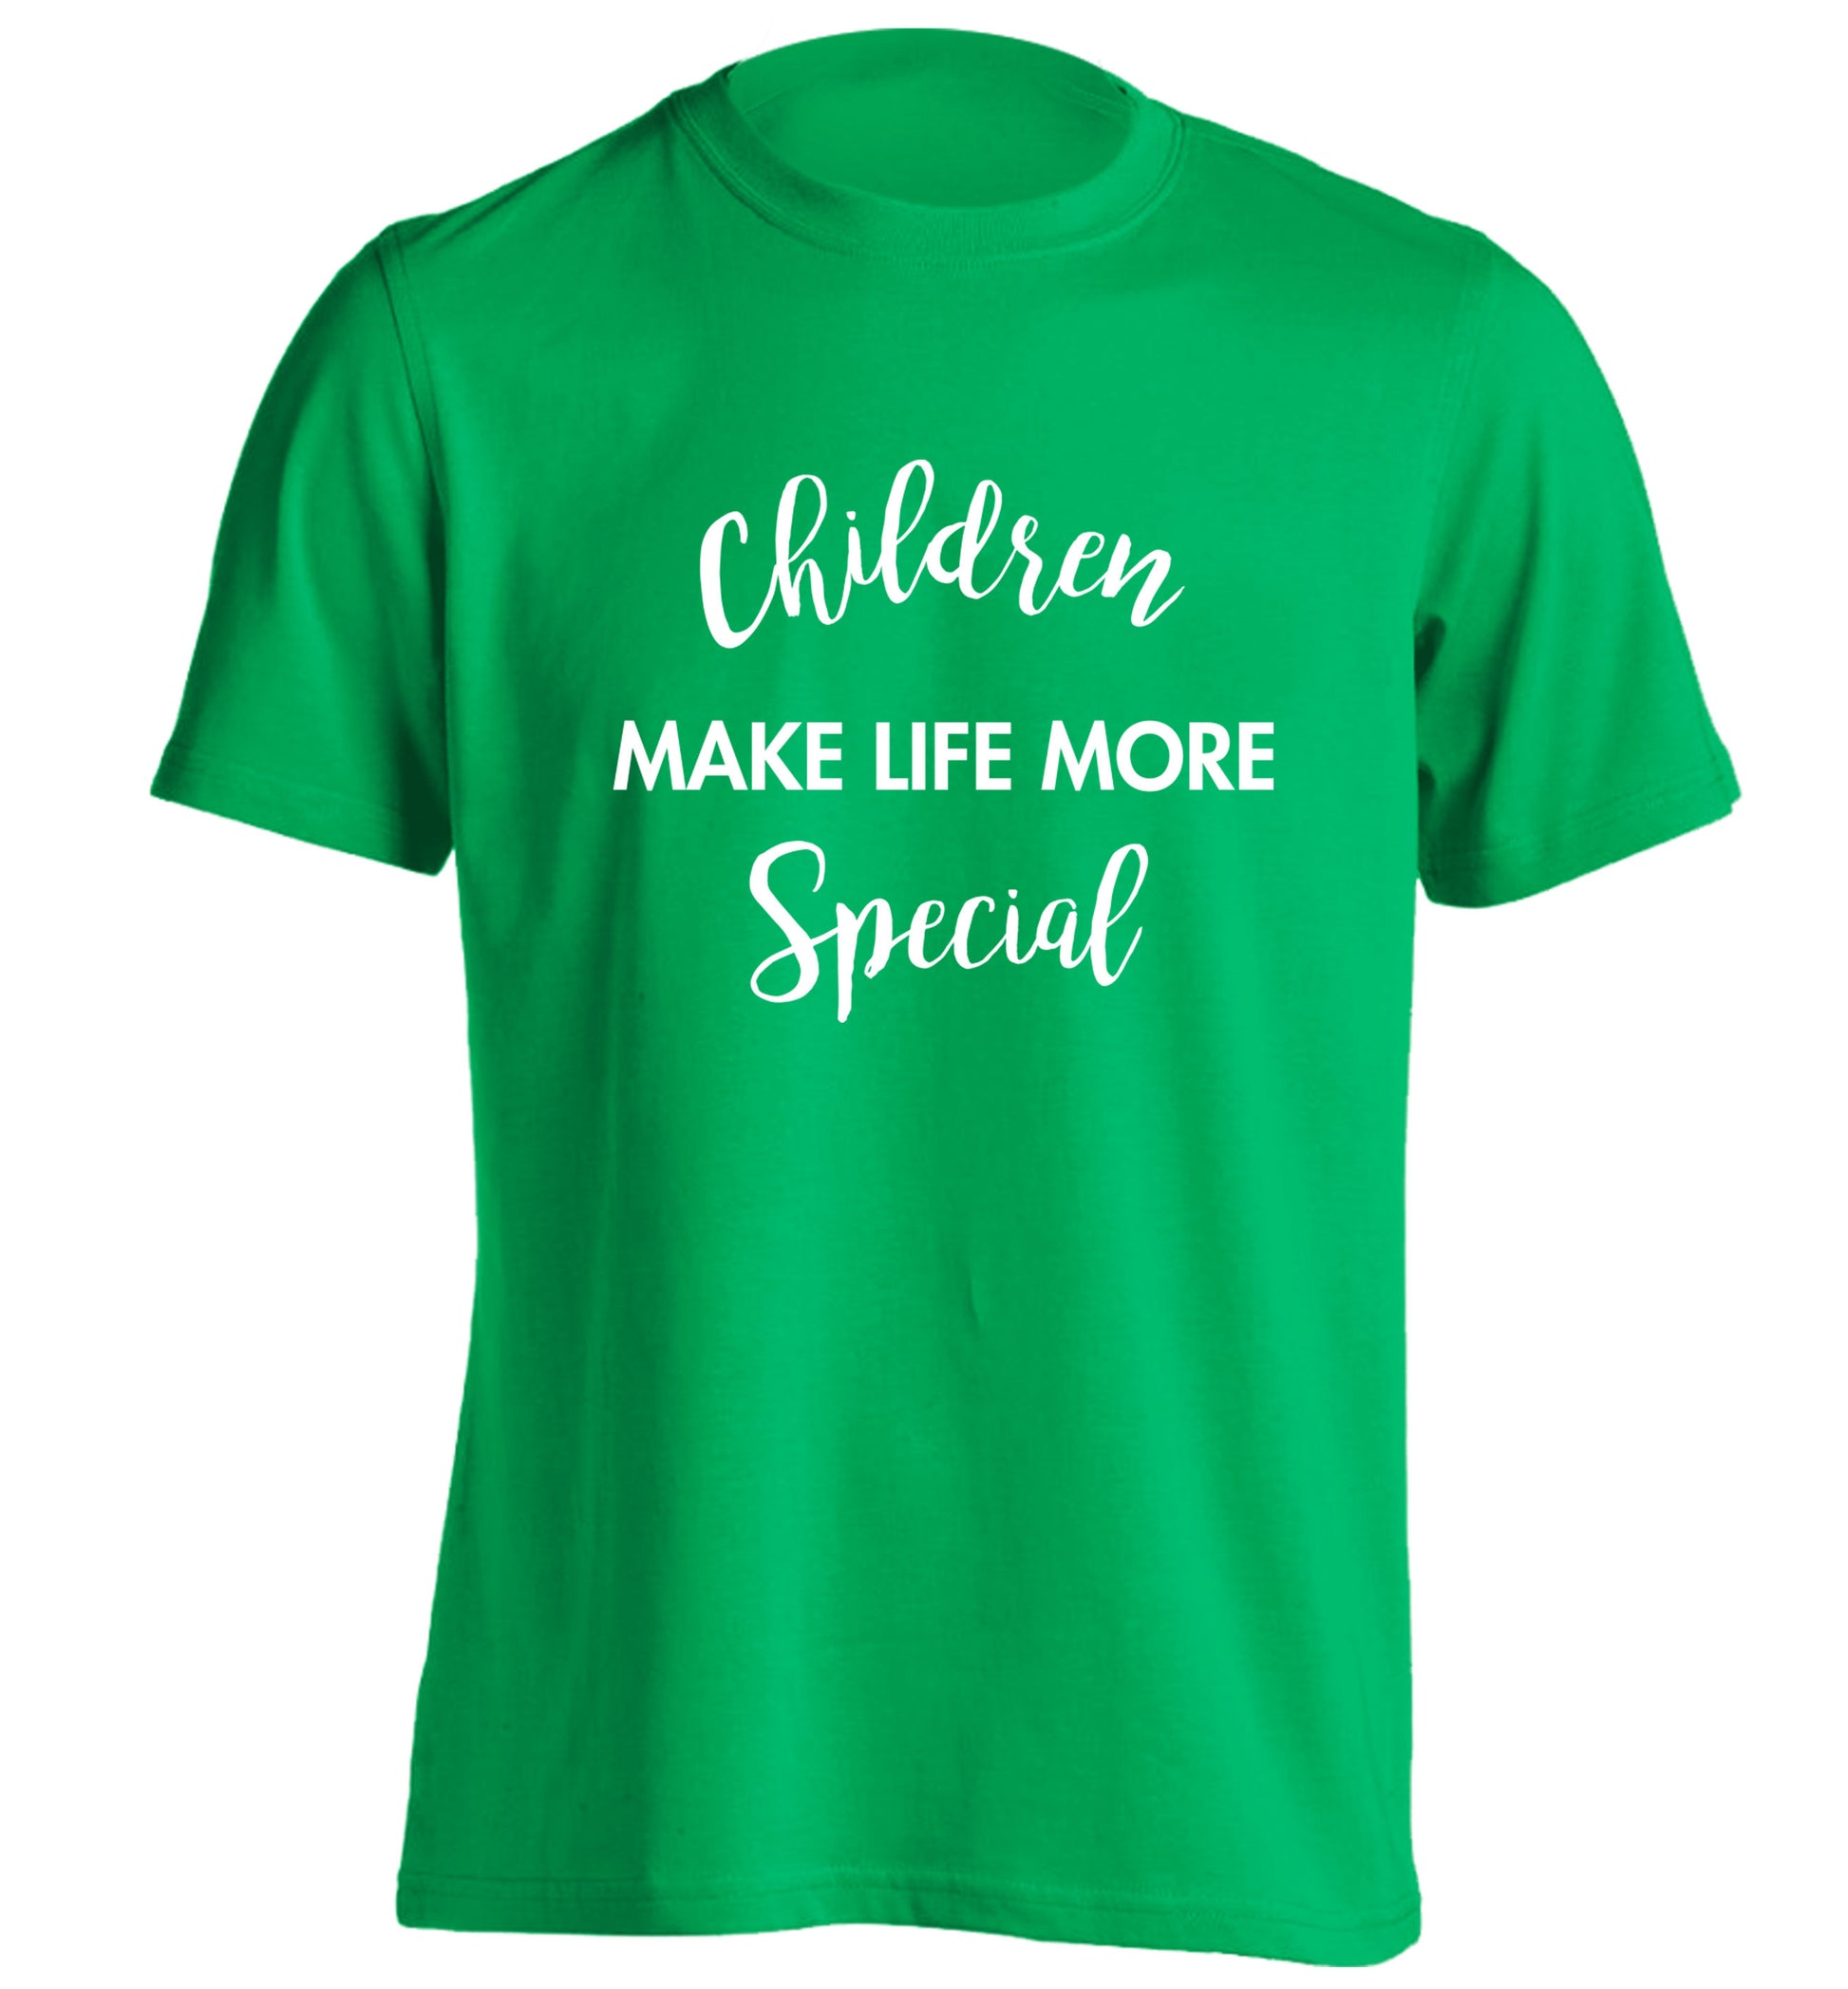 Children make life more special adults unisex green Tshirt 2XL